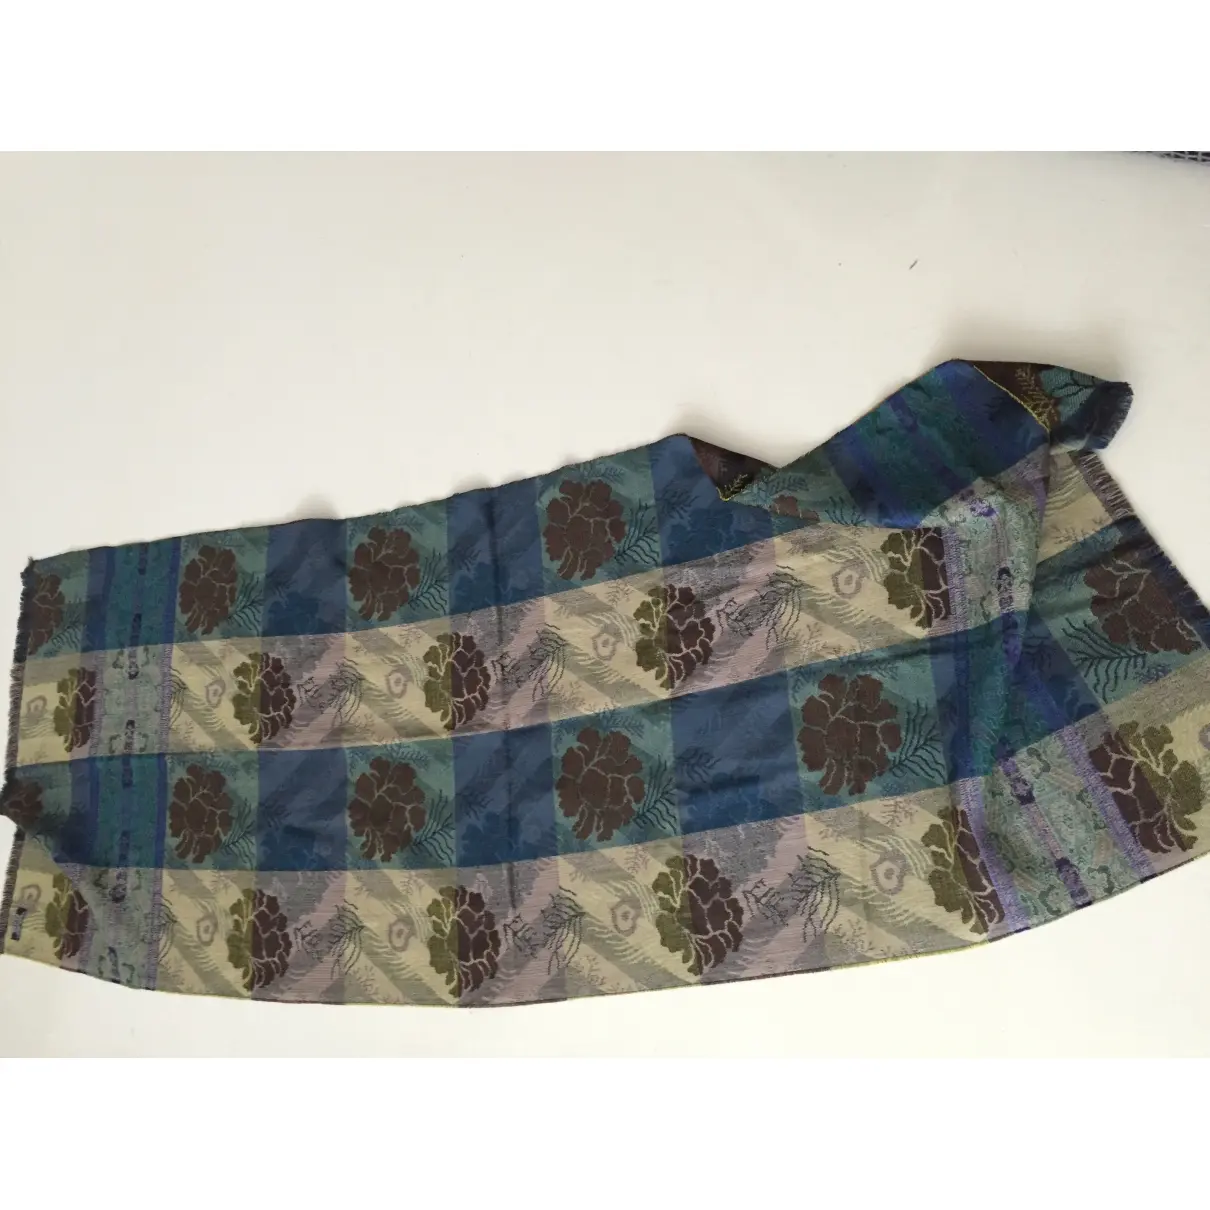 Kenzo Wool stole for sale - Vintage